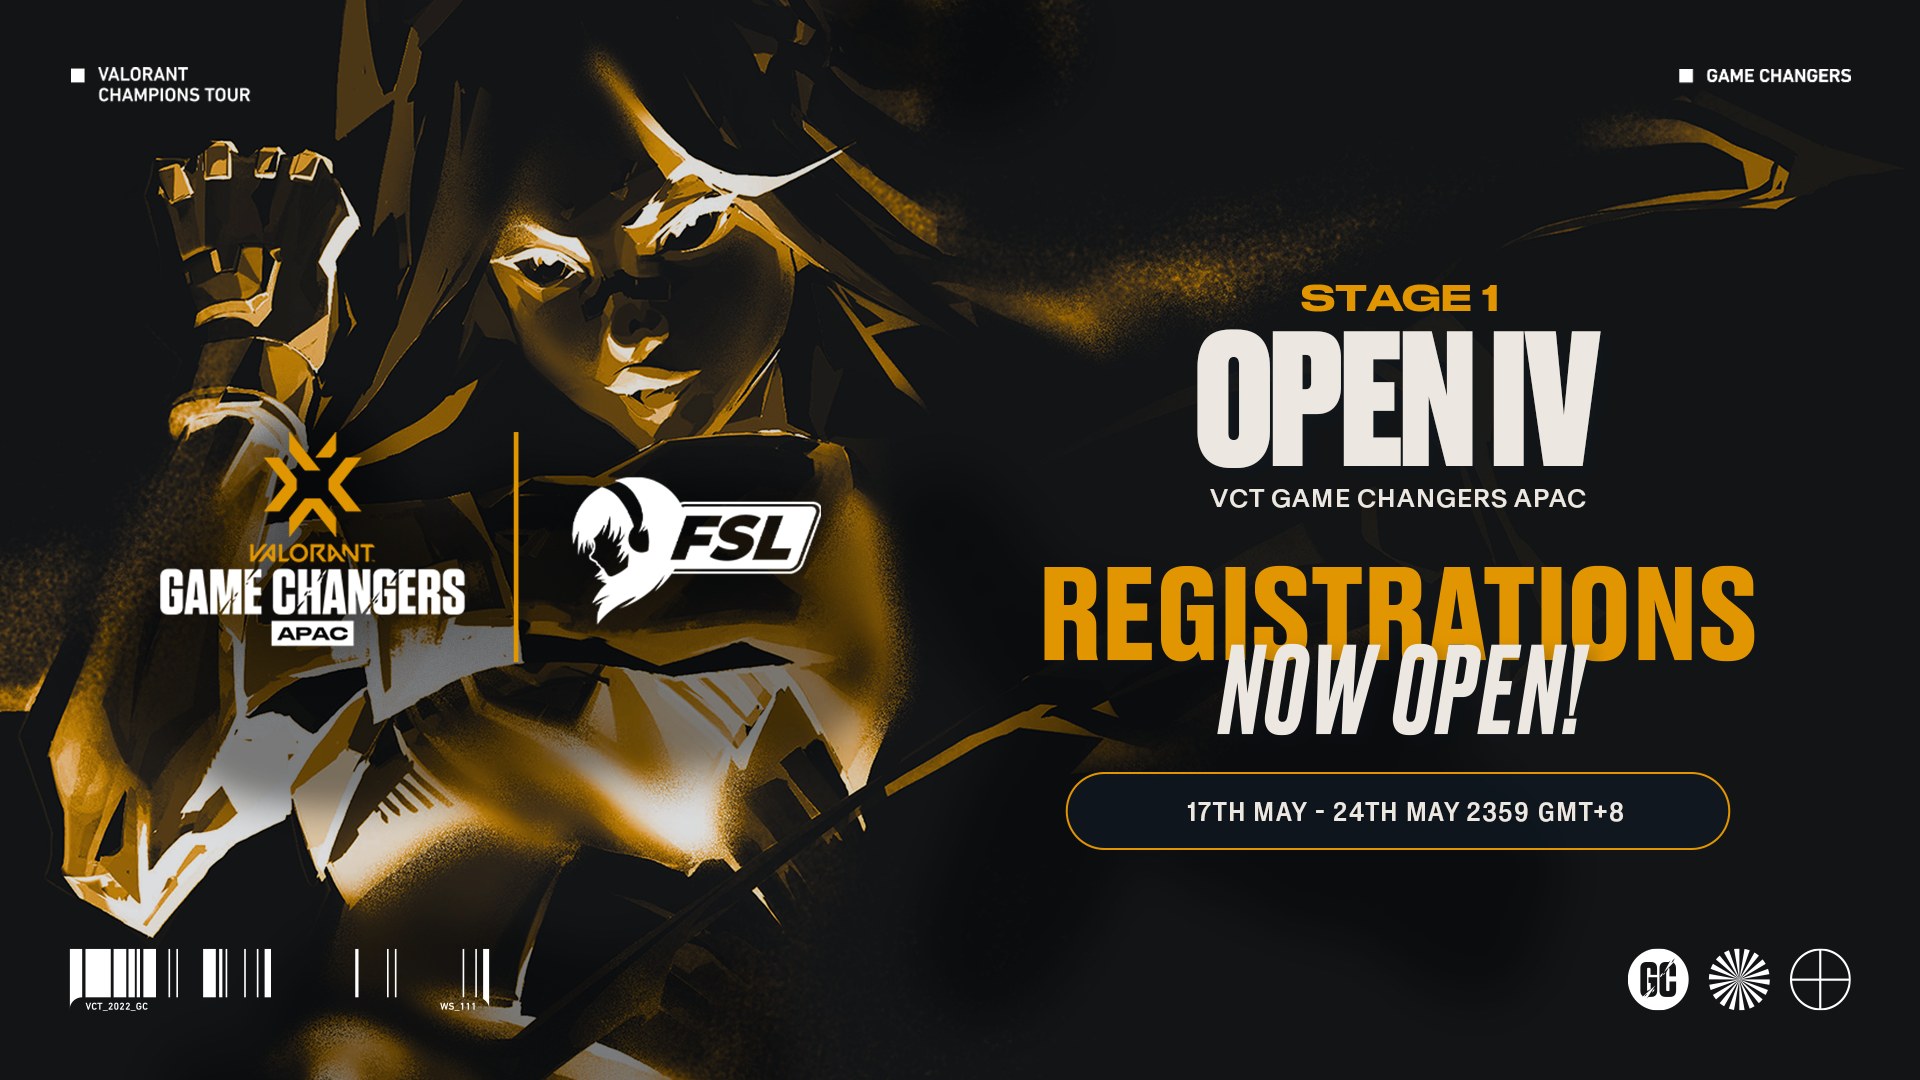 FSL opens registration for VCT Game Changers APAC Open 4 VALO2ASIA